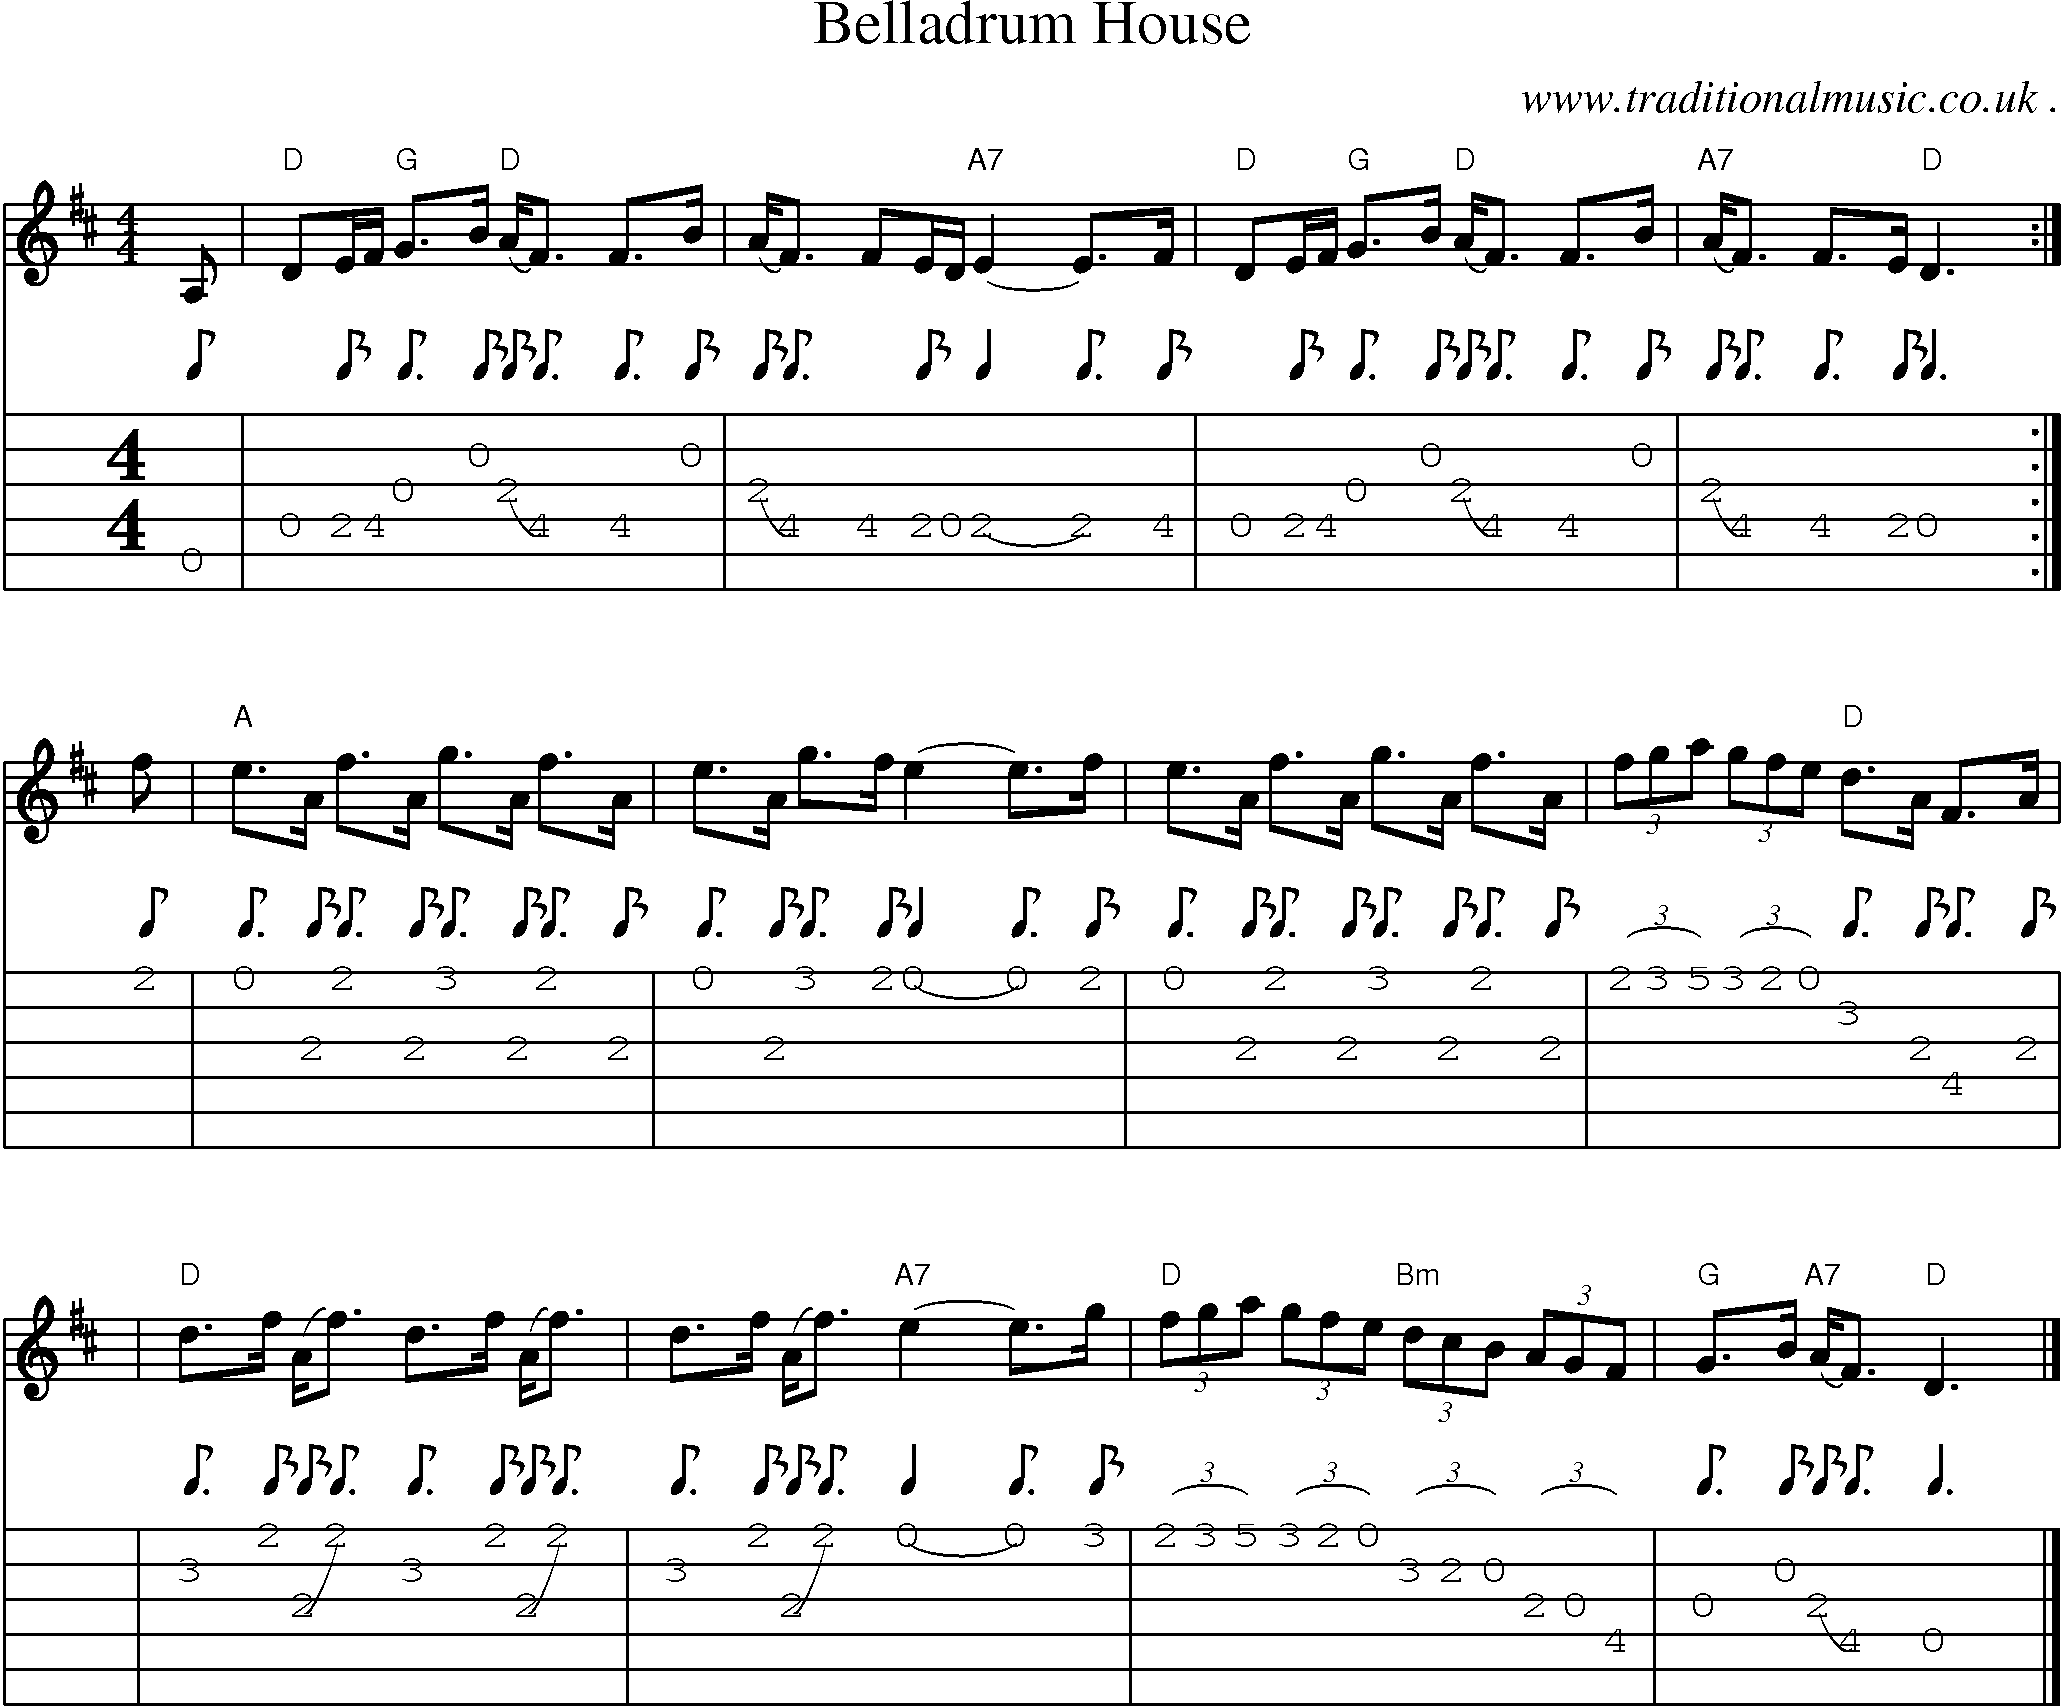 Sheet-music  score, Chords and Guitar Tabs for Belladrum House